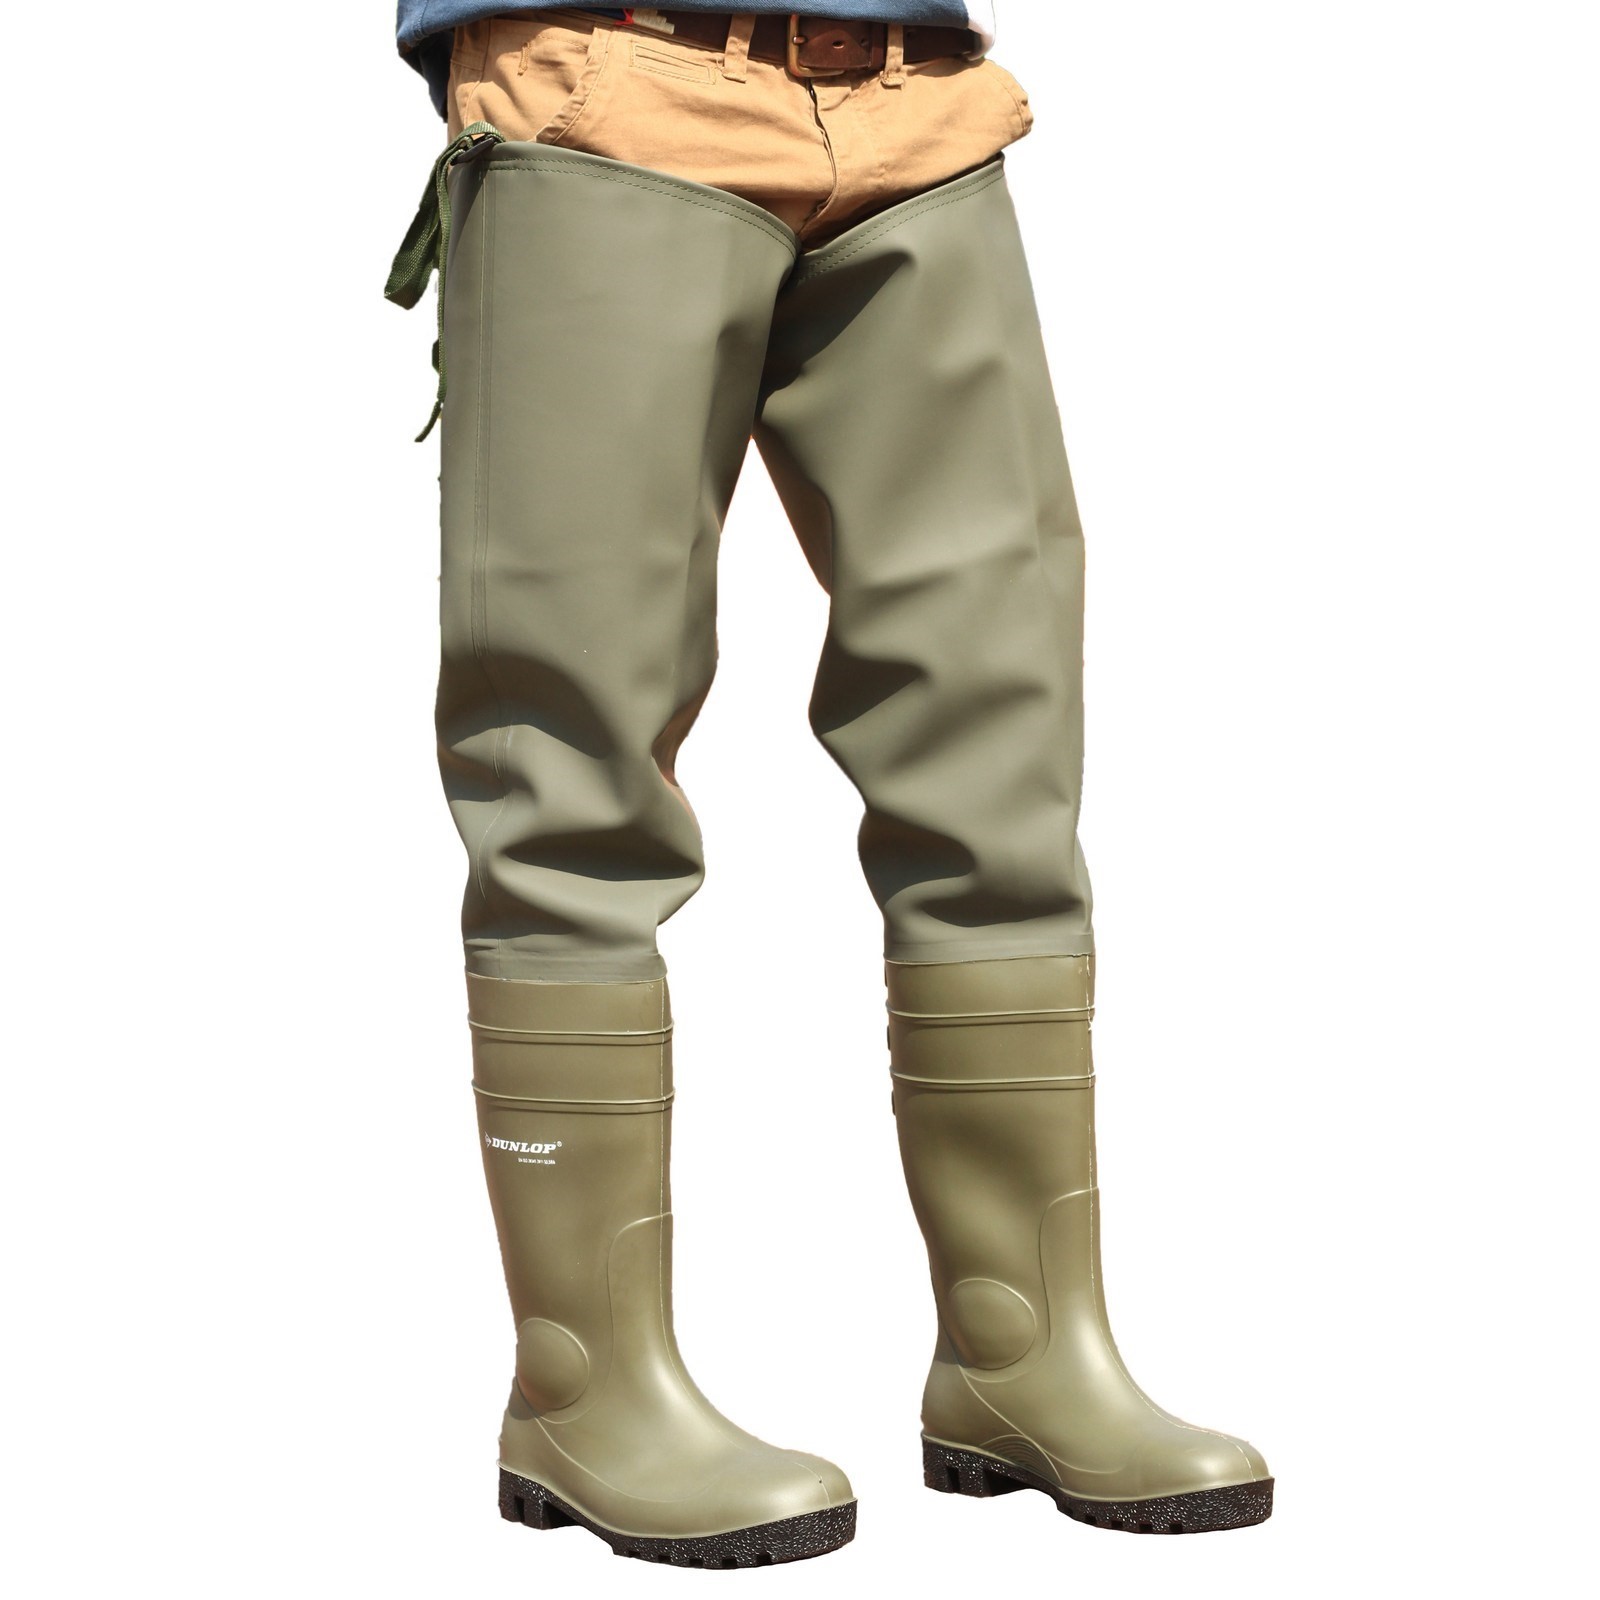 Thigh Wader 142 VP PP - First Safety